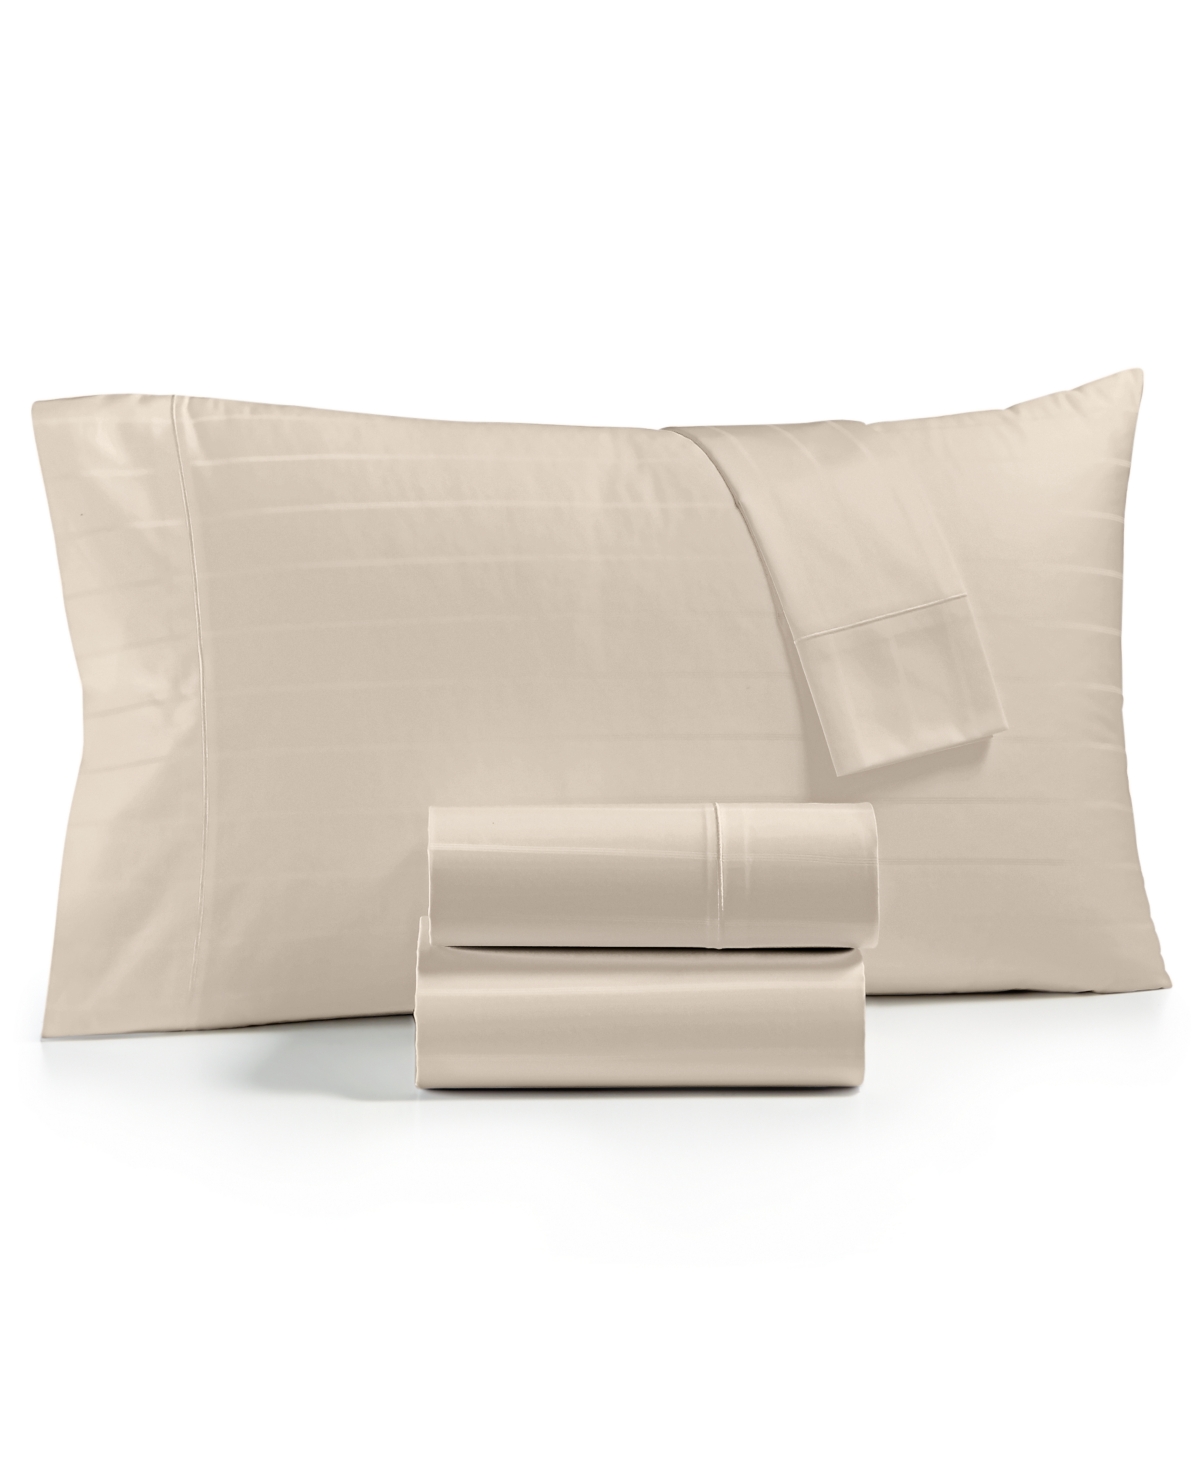  Charter Club Damask Solid 550 Thread Count Supima Cotton 4  Piece California King Sheet Set Parchment Beige : Home & Kitchen